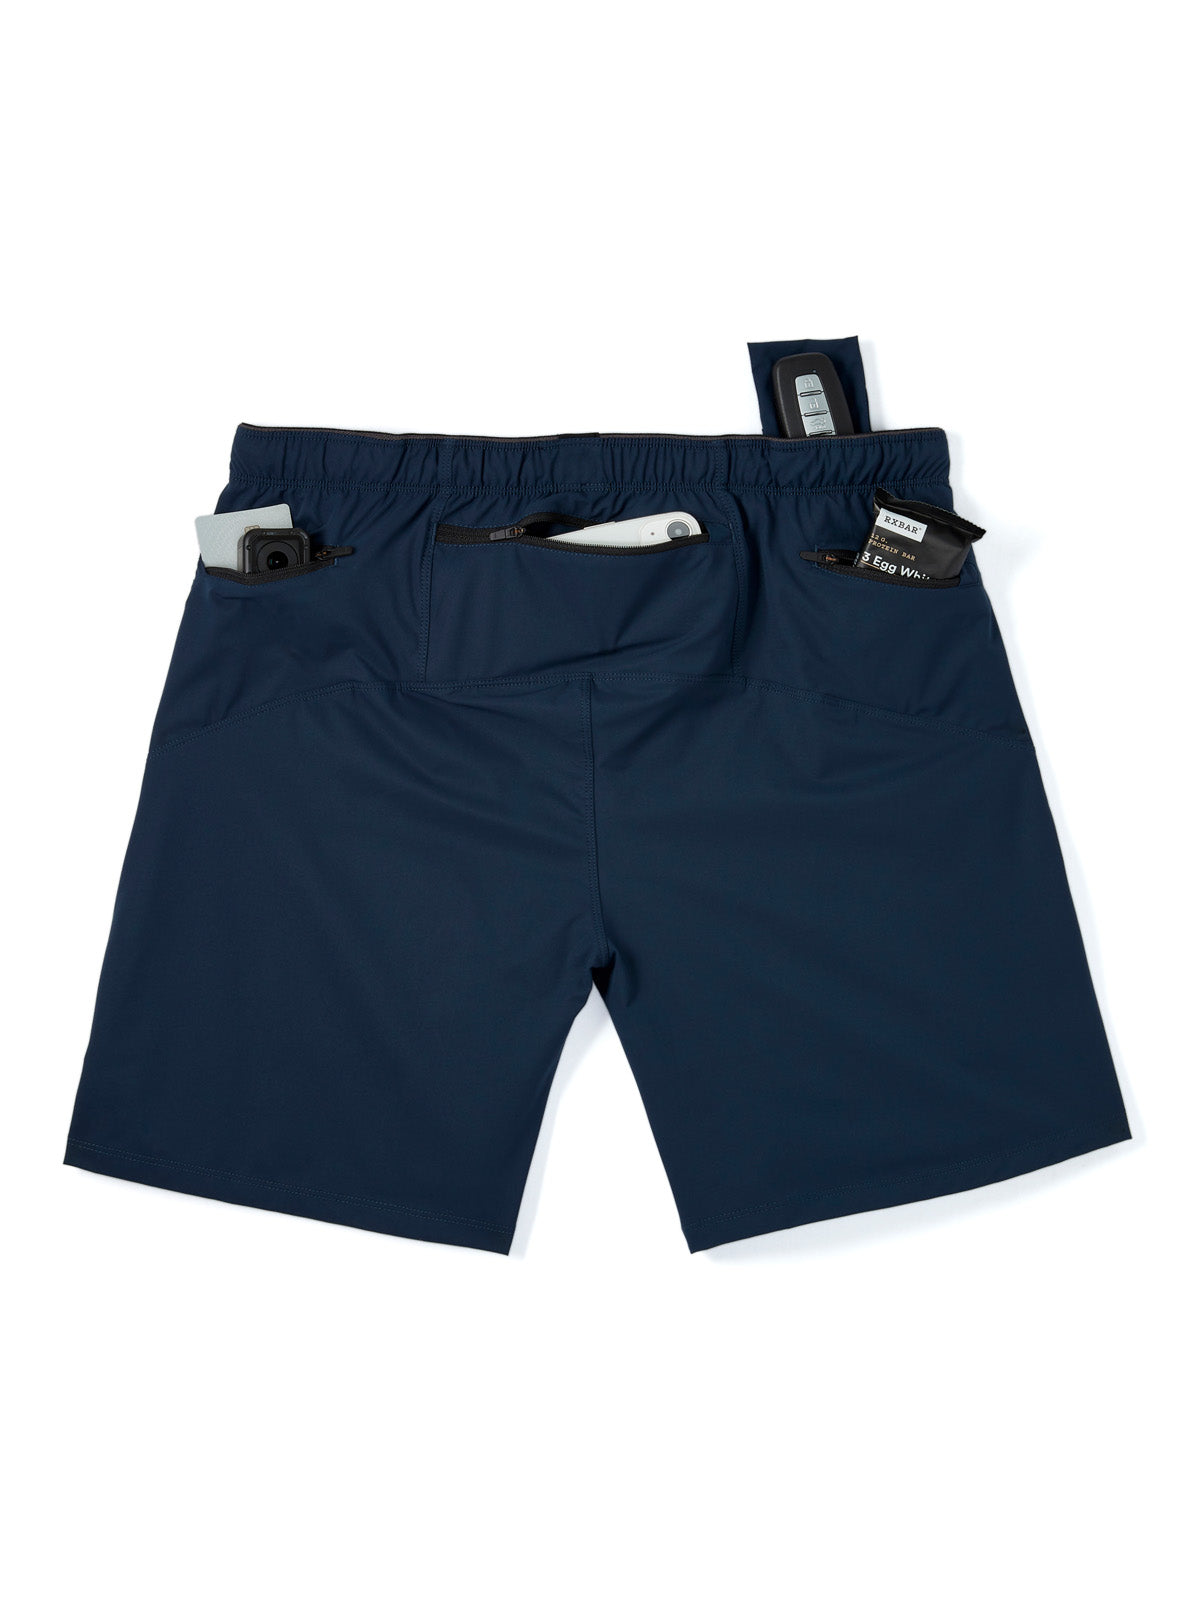 image-variant-color-navy--